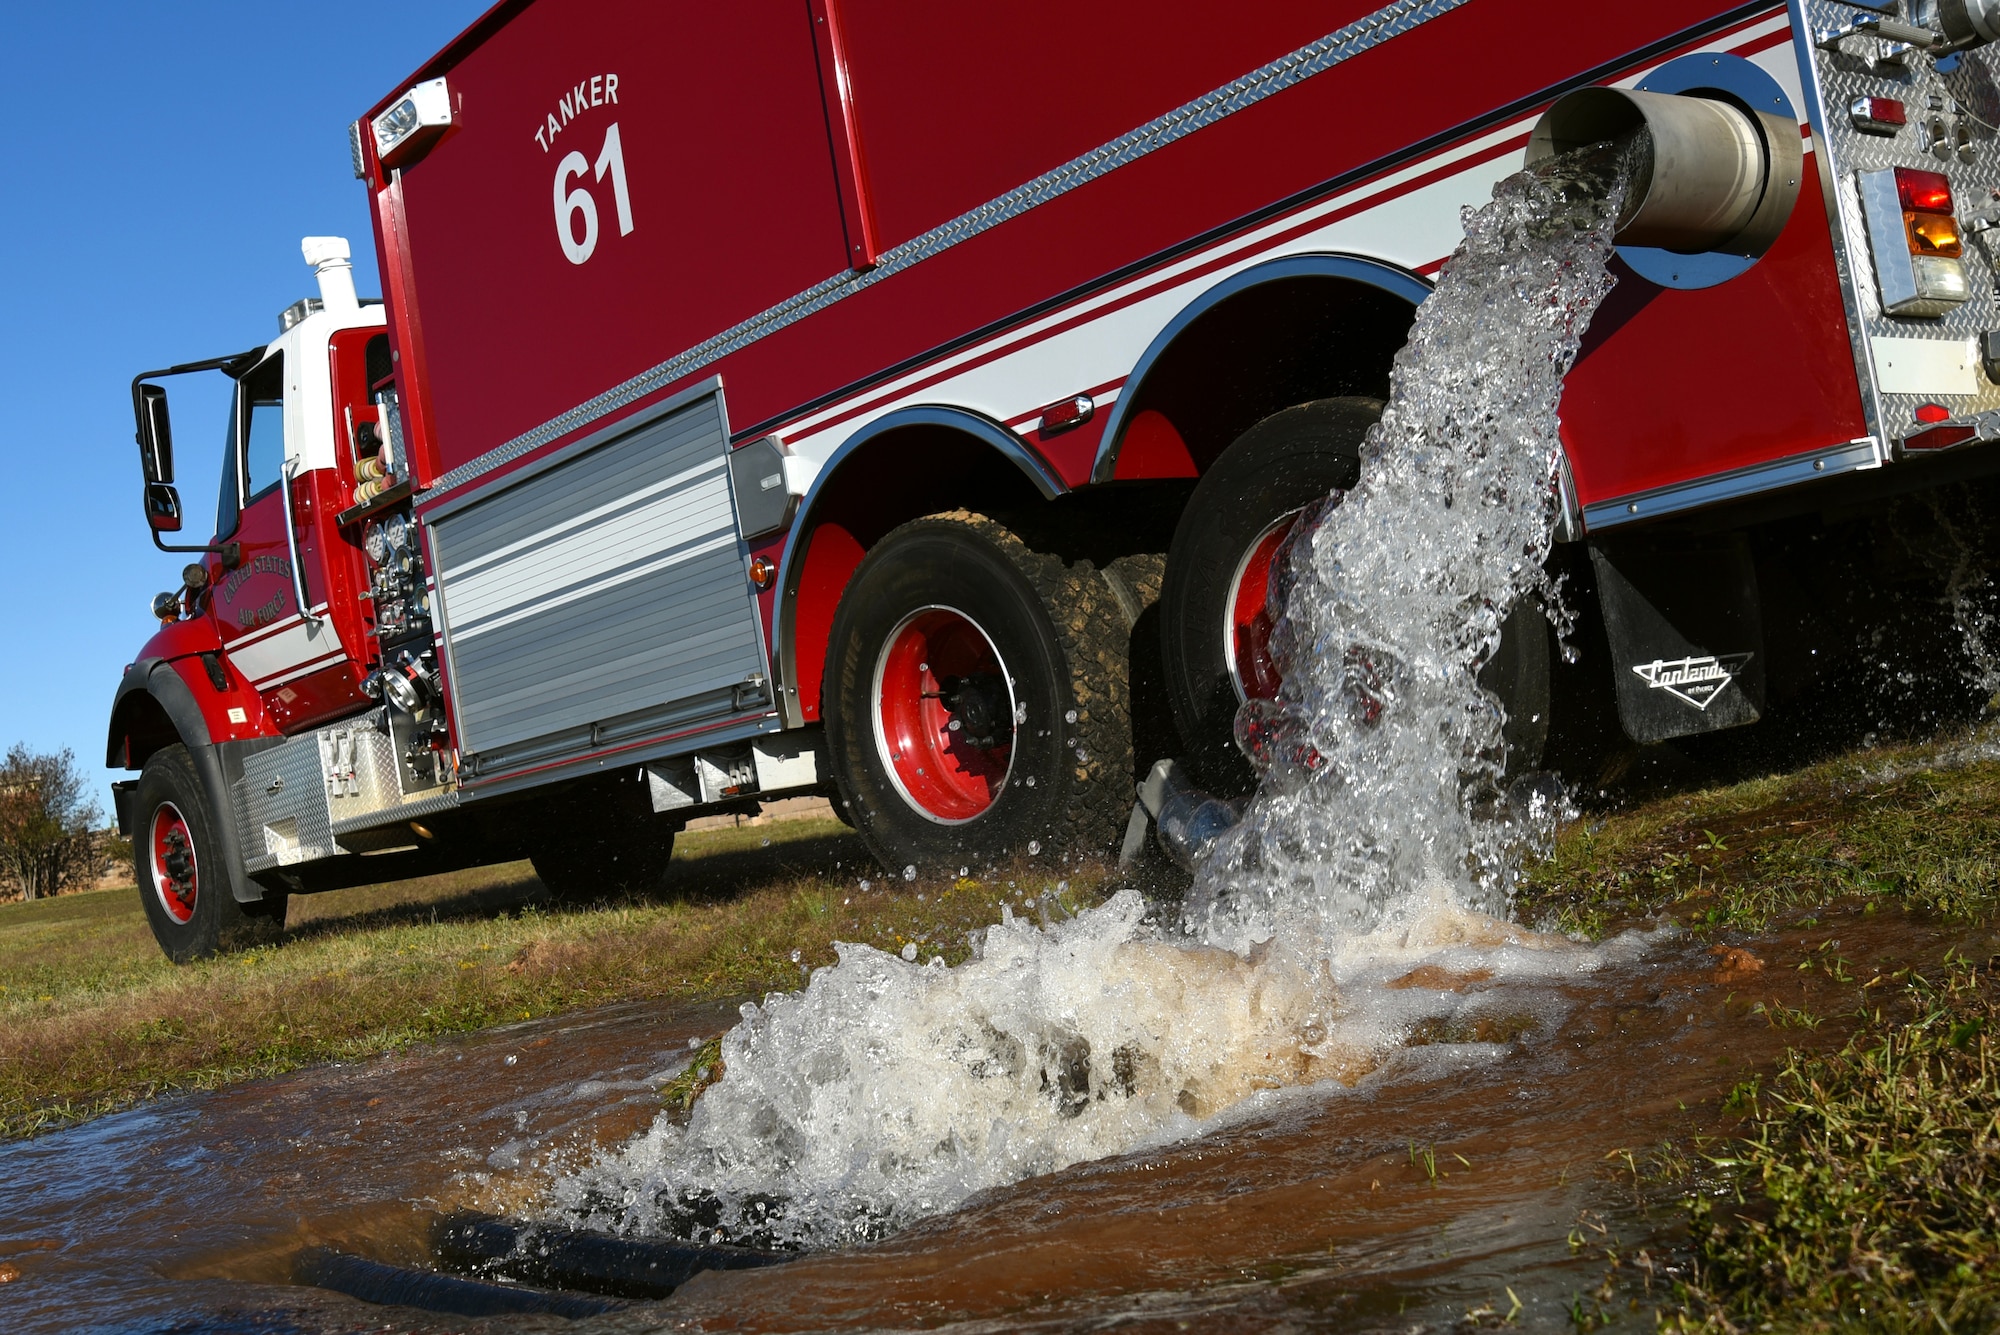 During an annual fuel spill major accident response exercise, Team Shaw members reacted to a simulated escape of 450,000 gallons of fuel, represented by water, at Shaw Air Force Base, South Carolina, Nov. 17, 2017.